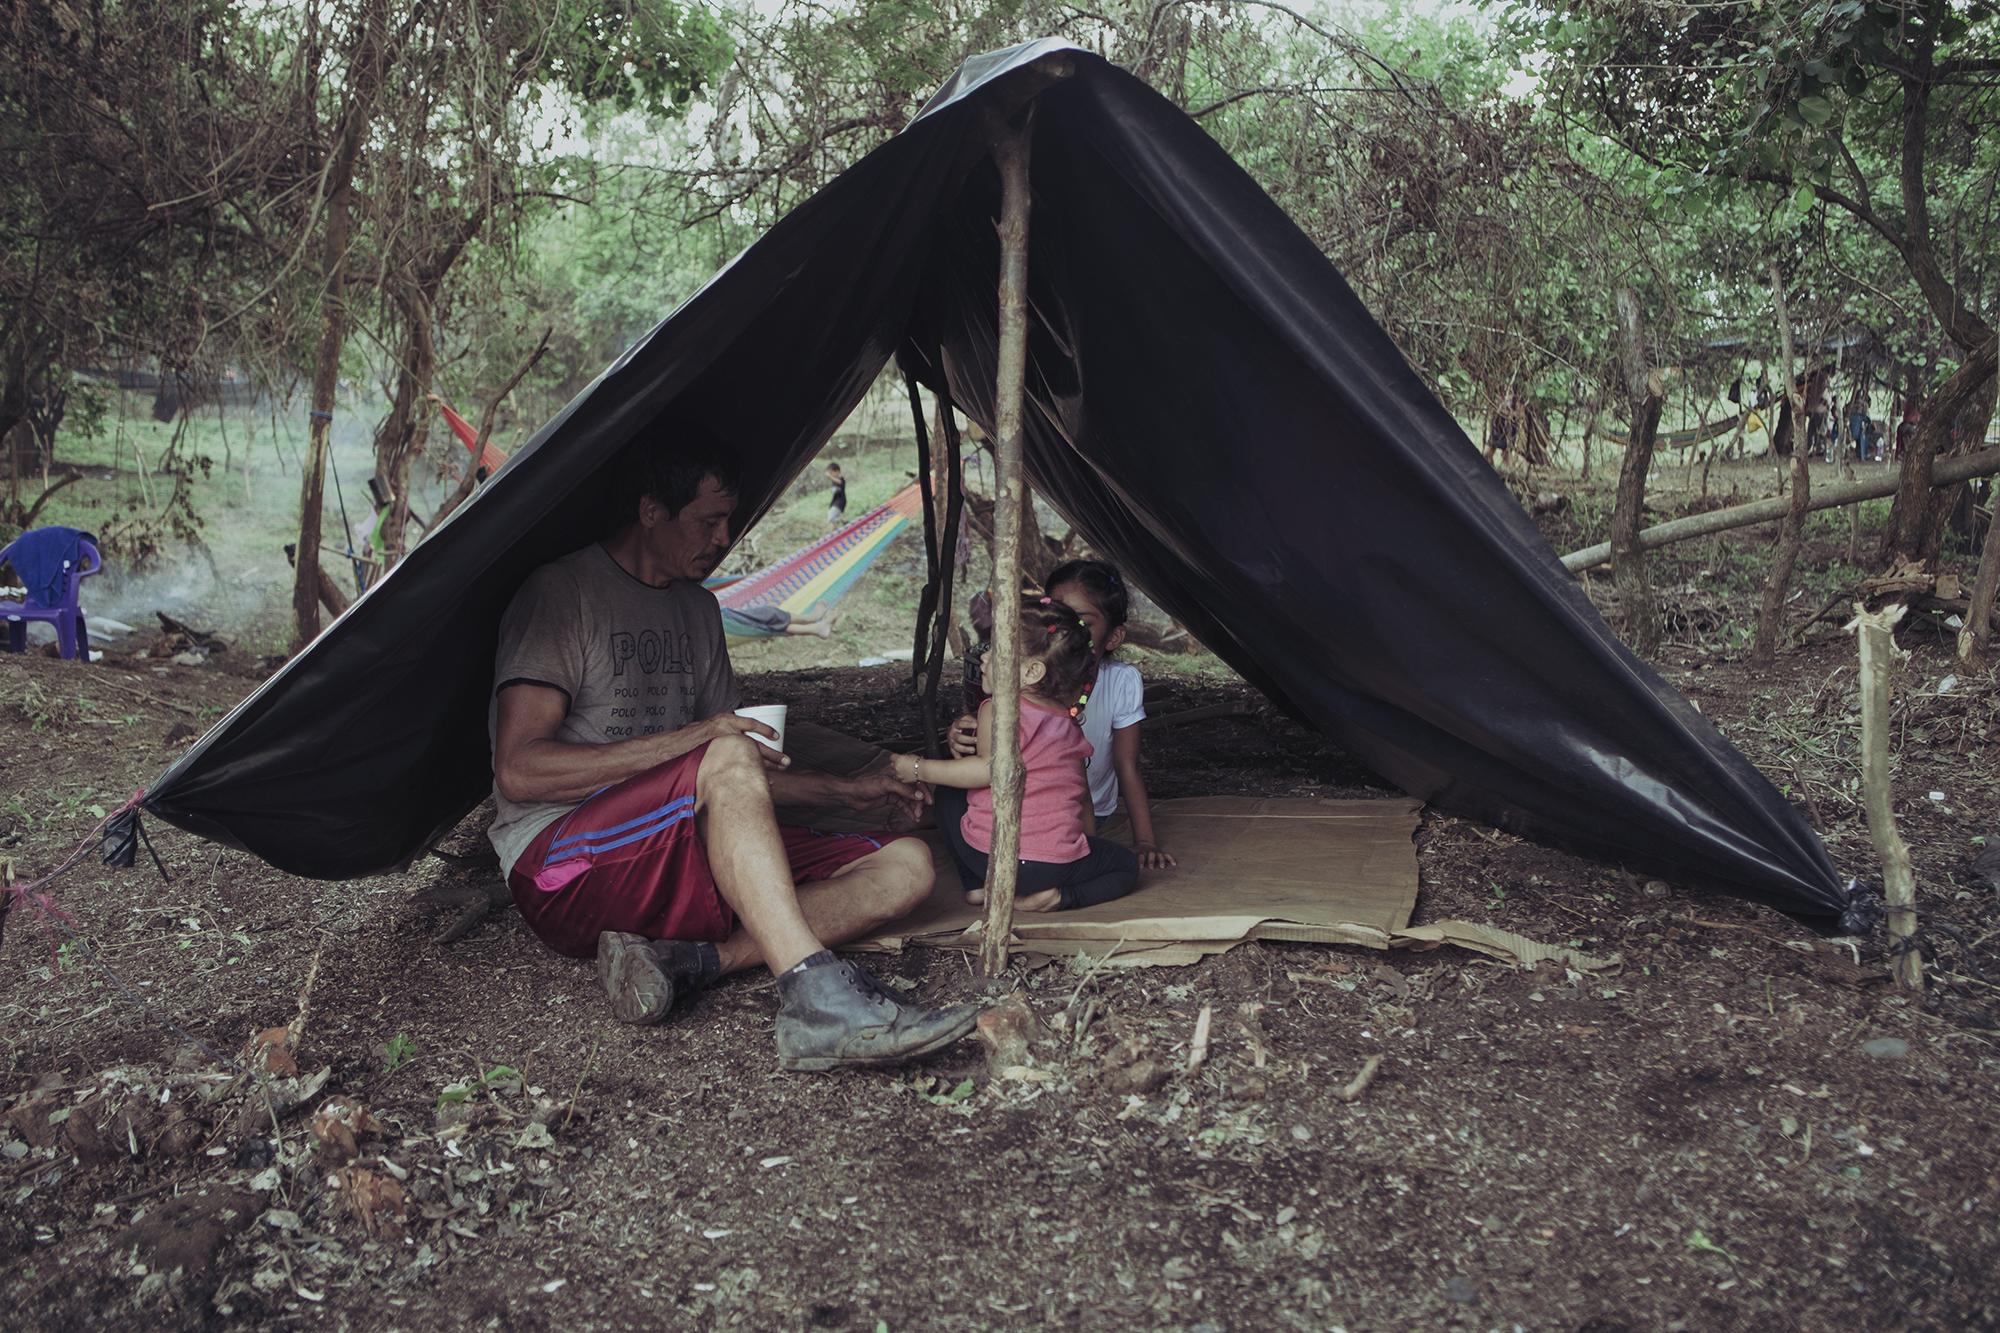 Sebastián Orellana rests with his daughters inside a tent built with sticks and a plastic tarp on the land where they’ve lived for a month. Sebastián, who sells essential goods for a living, has been unable to work during the quarantine. As a community leader, he helps others construct their own tents. “What we want is for the authorities to pay attention to us and for someone to donate this land to us so we can live here legally. This land has seen some bad things but now is home to 100 families,” he said. 